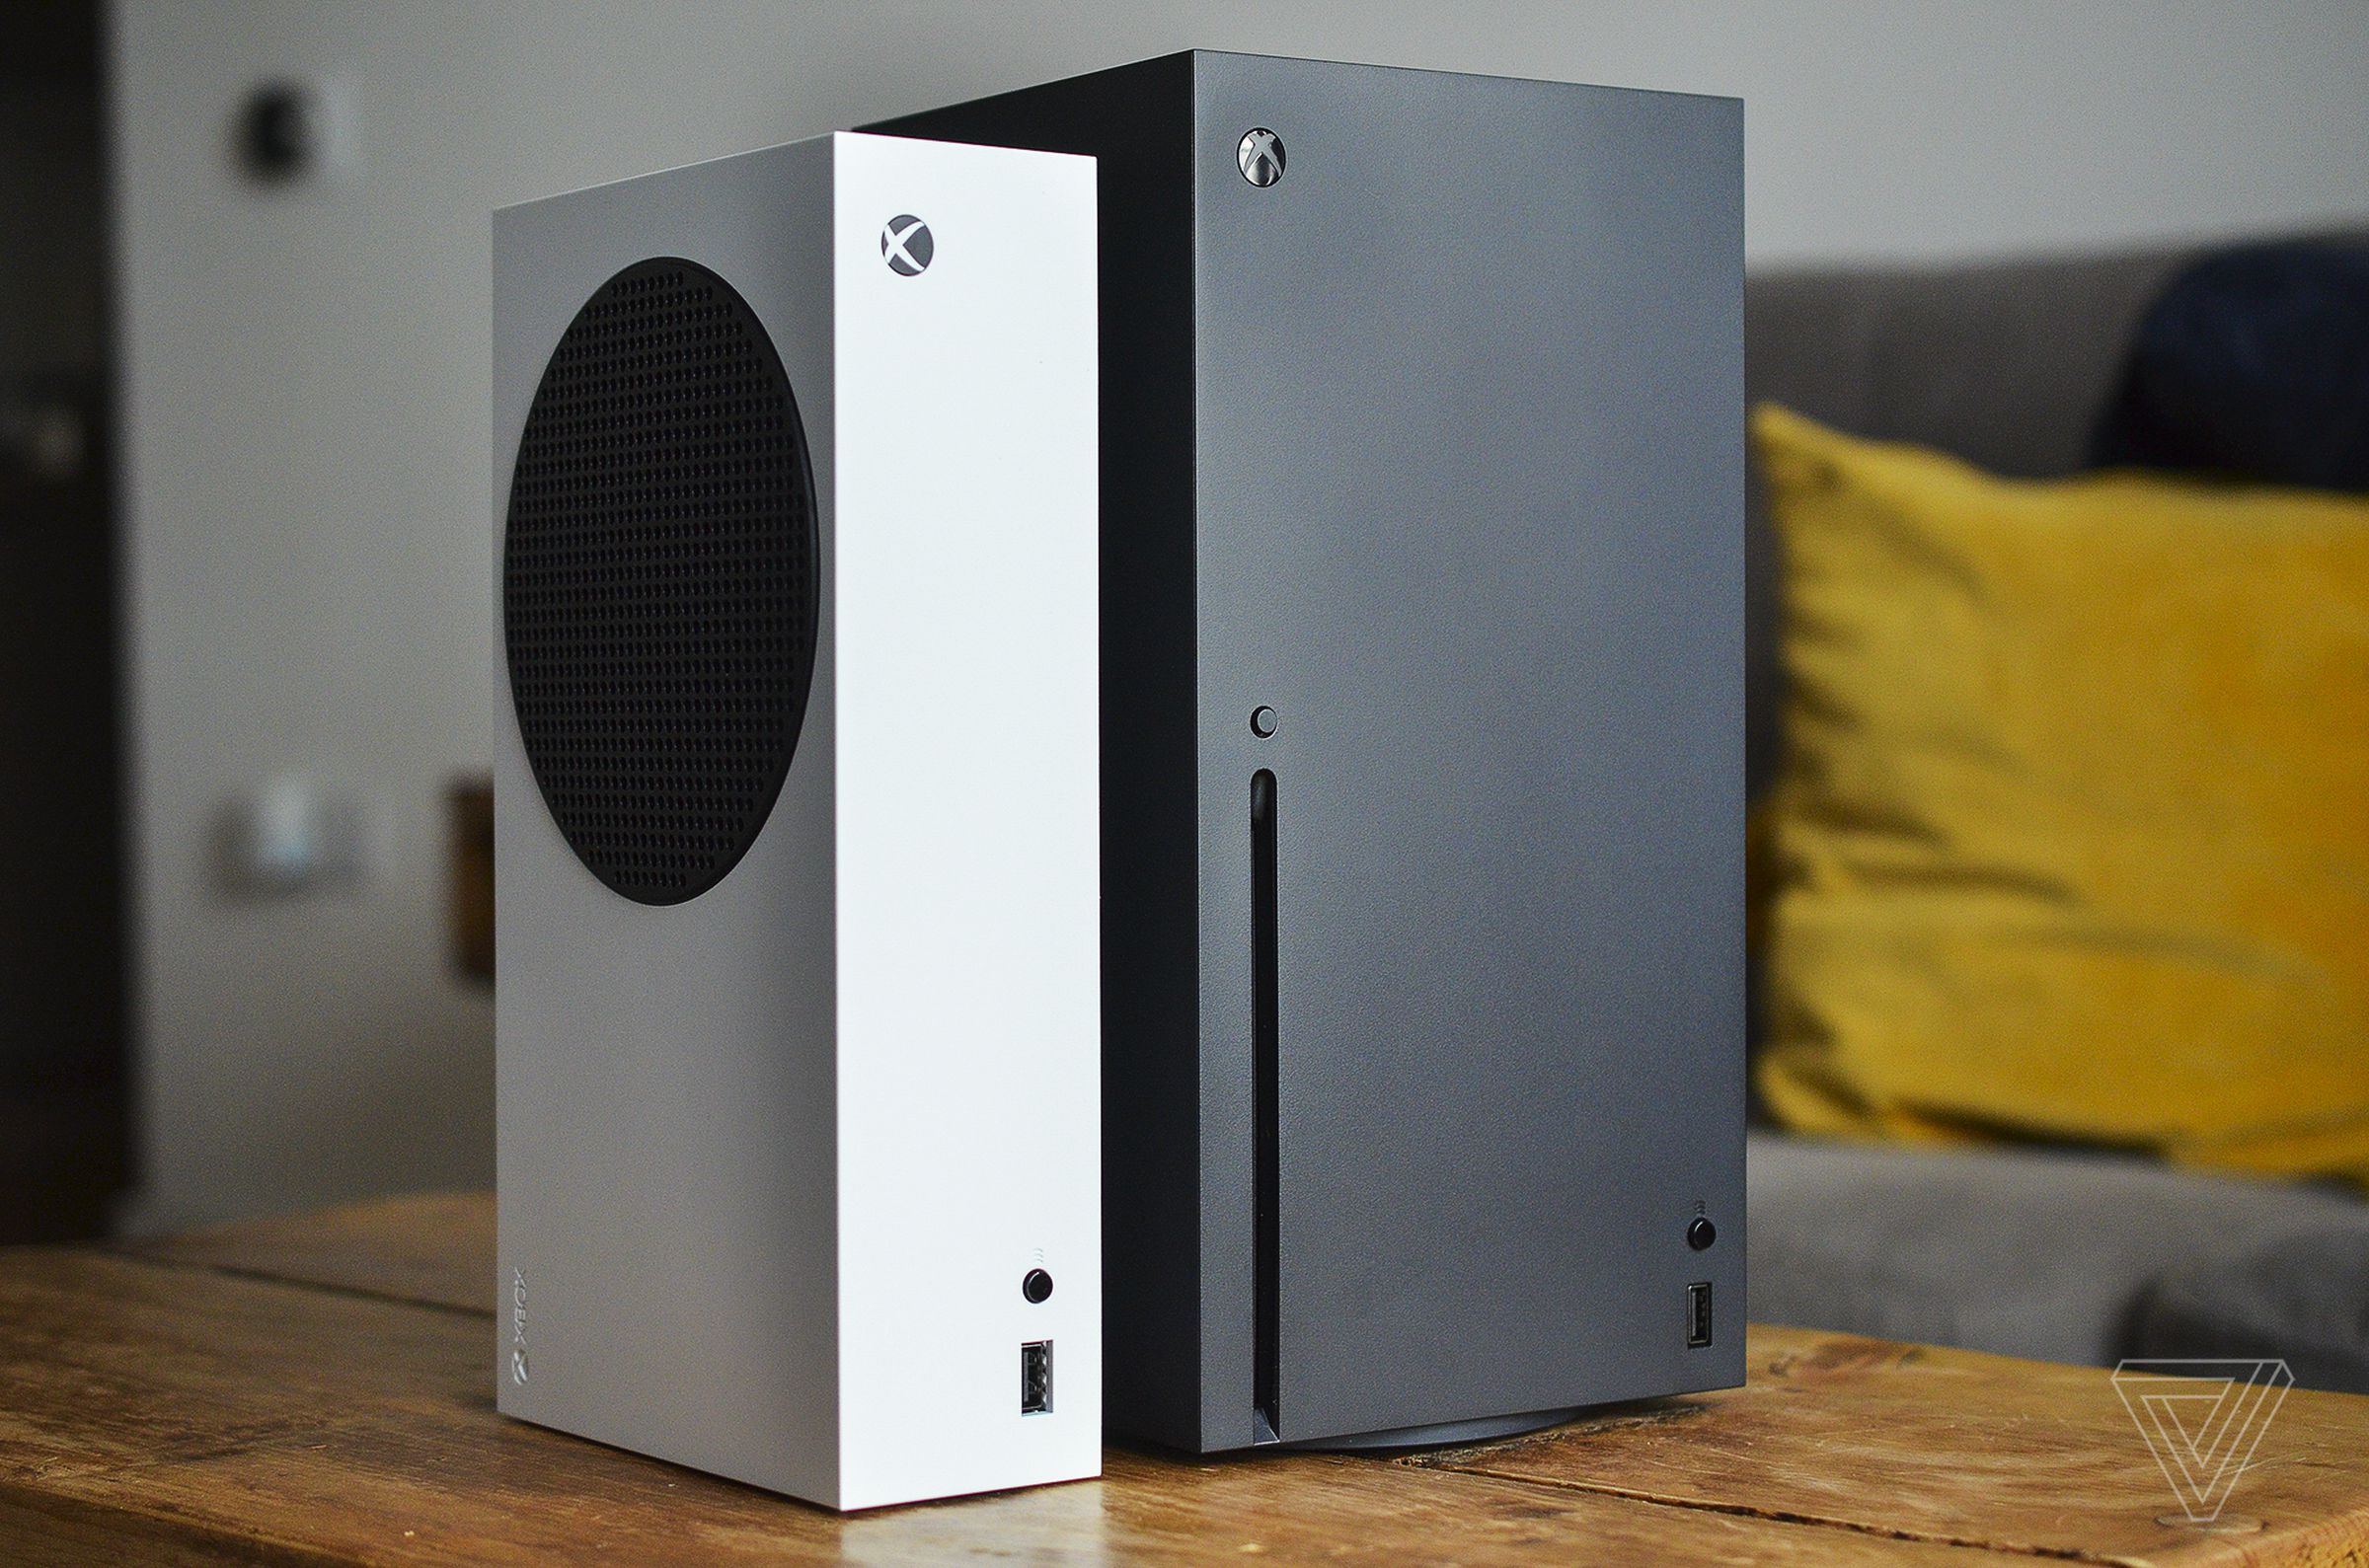 Microsoft's white Xbox Series S sits alongside a bigger and black Xbox Series X on a wooden coffee table in a living room